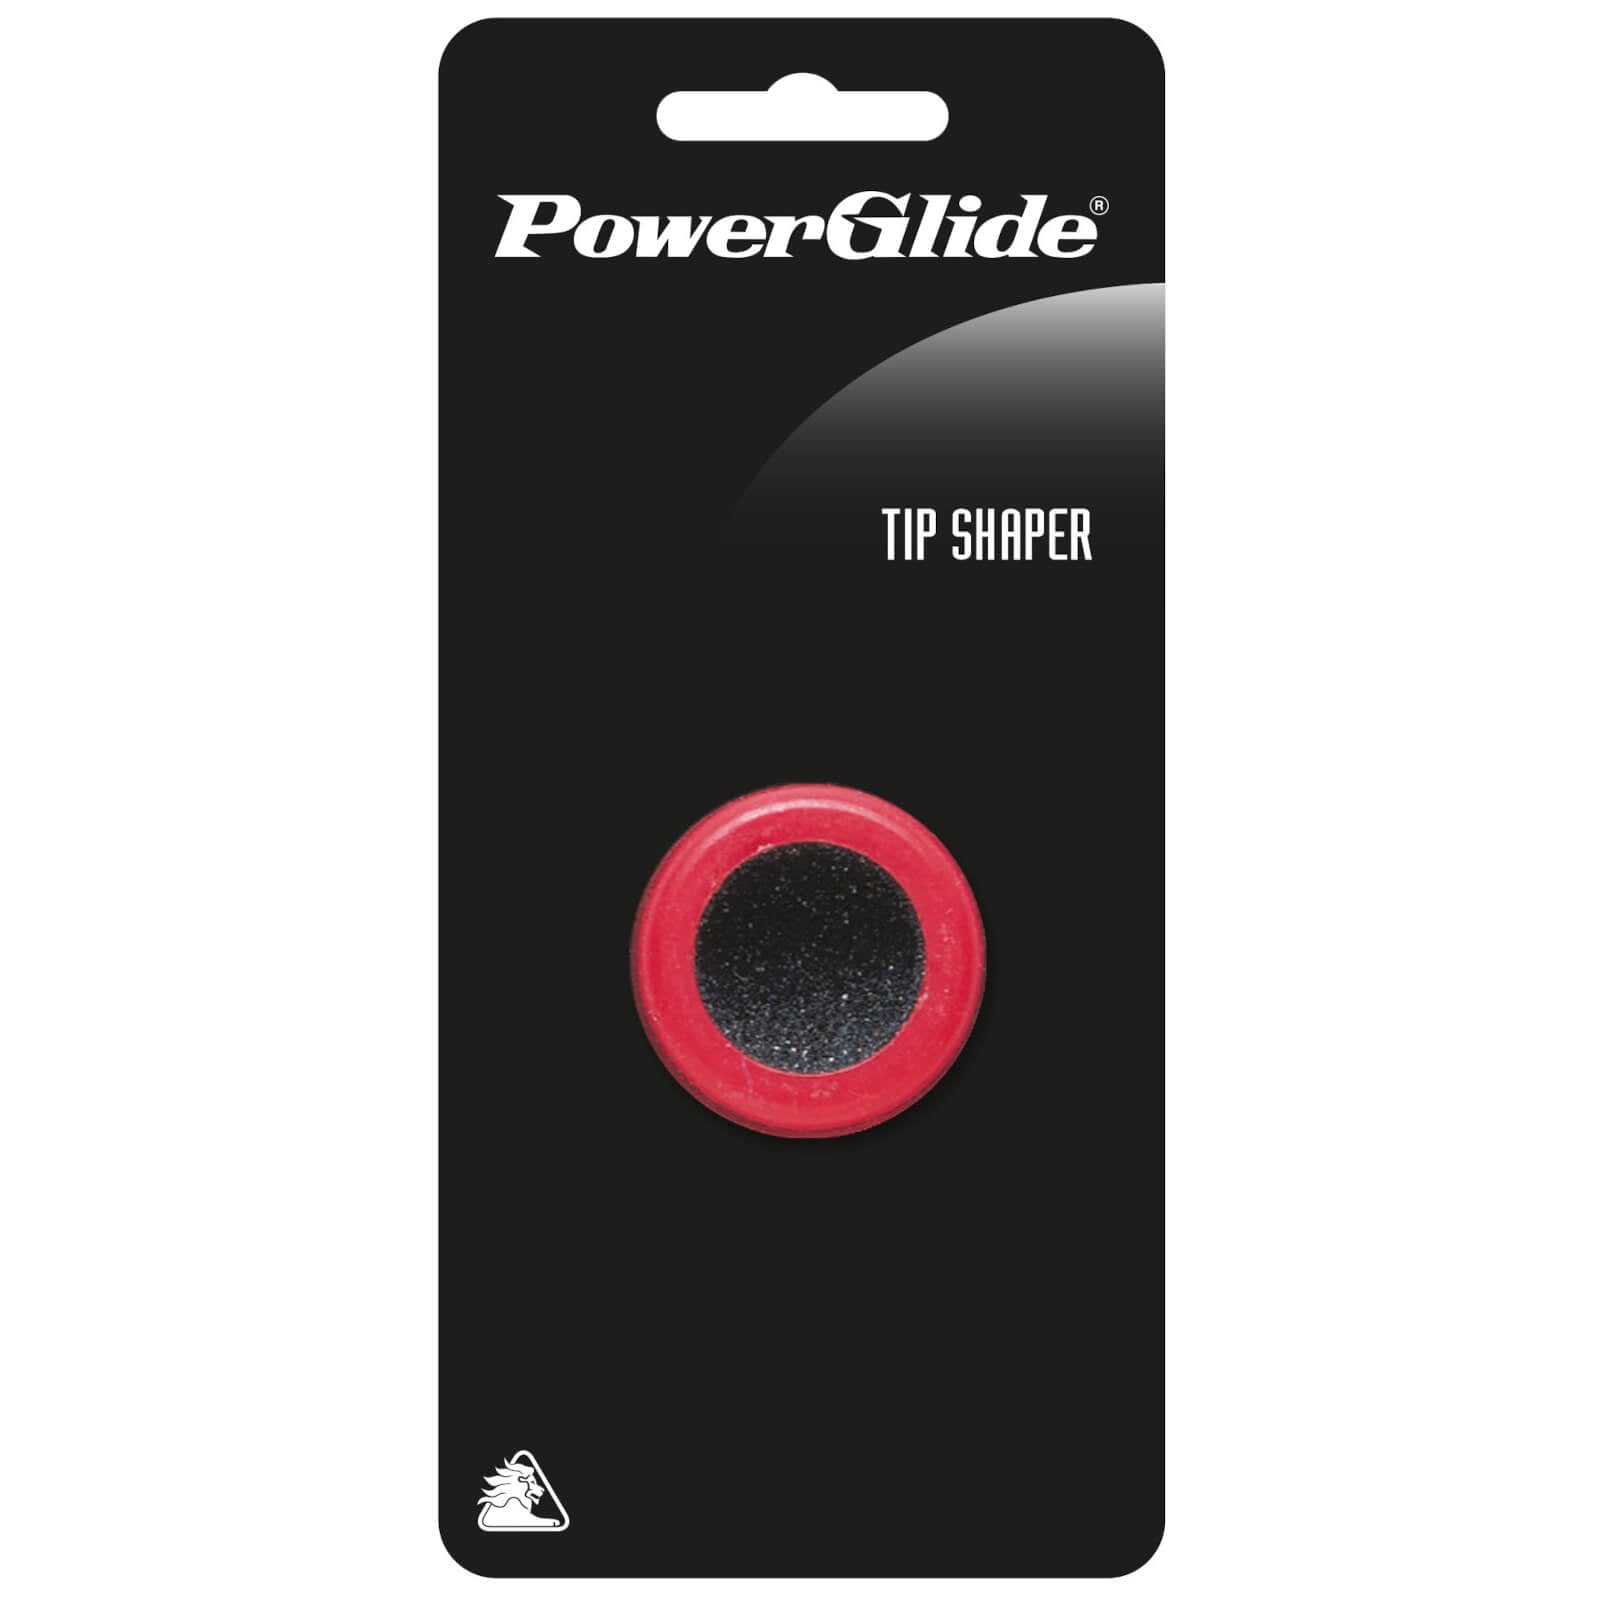 PowerGlide TIP SHAPER Snooker Accessory